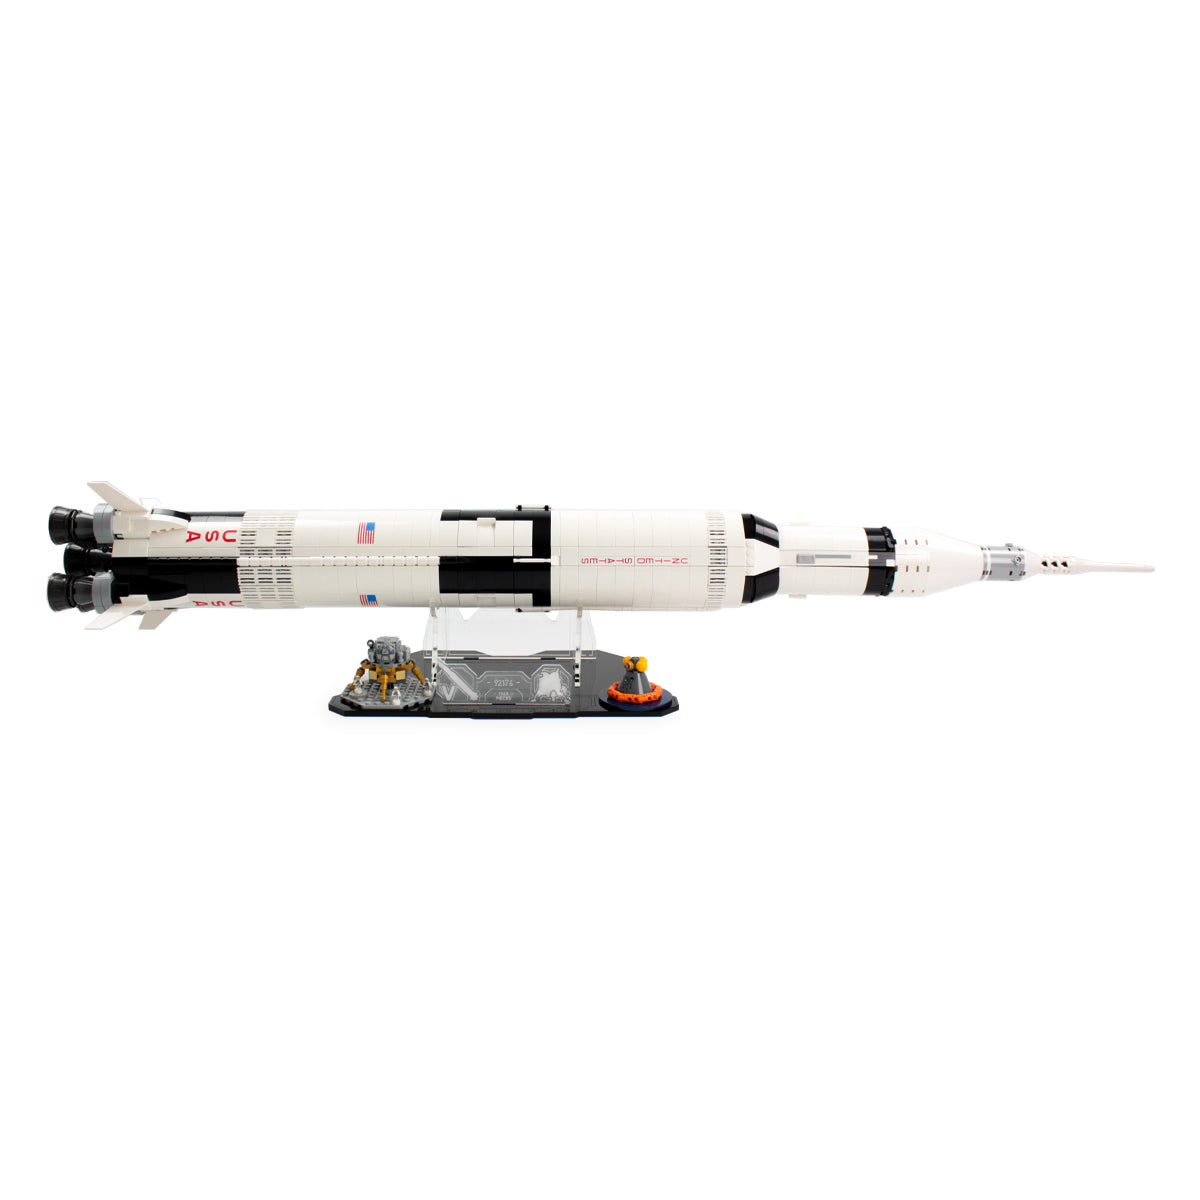 Display stand for Ideas: Apollo Saturn V (92176) Wicked